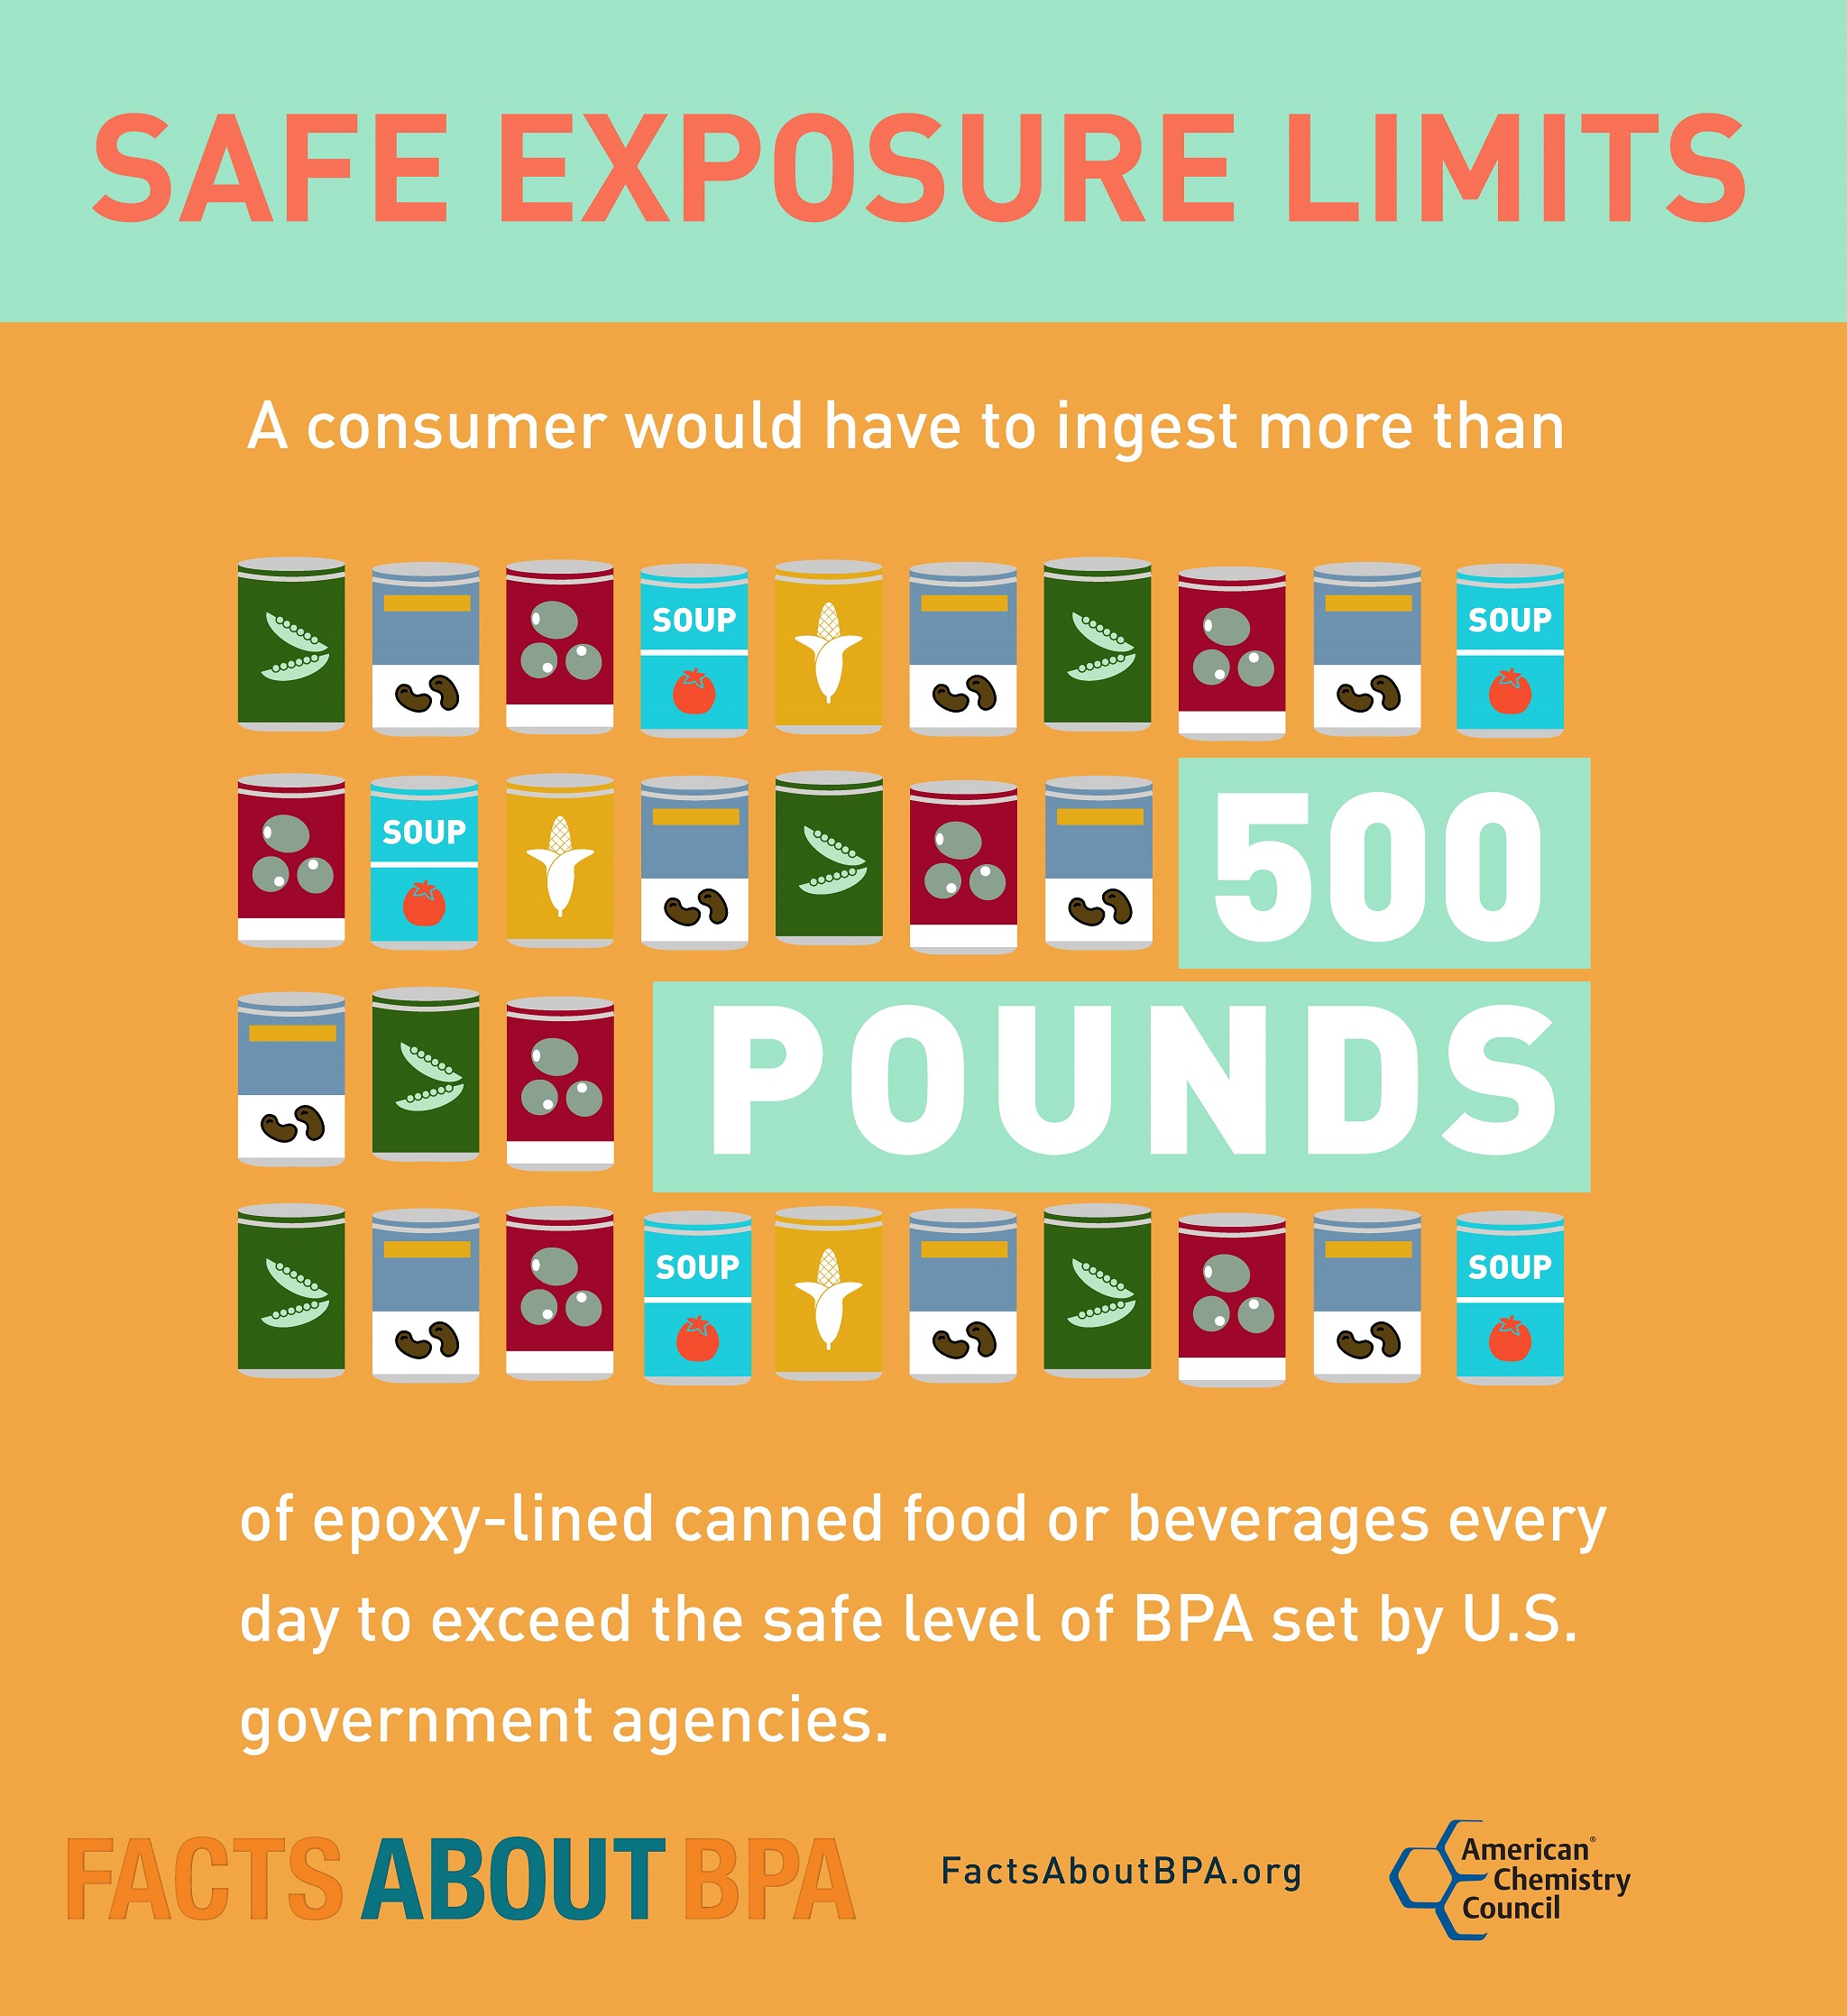 What is a food safe epoxy? Do they contain bisphenol A? 